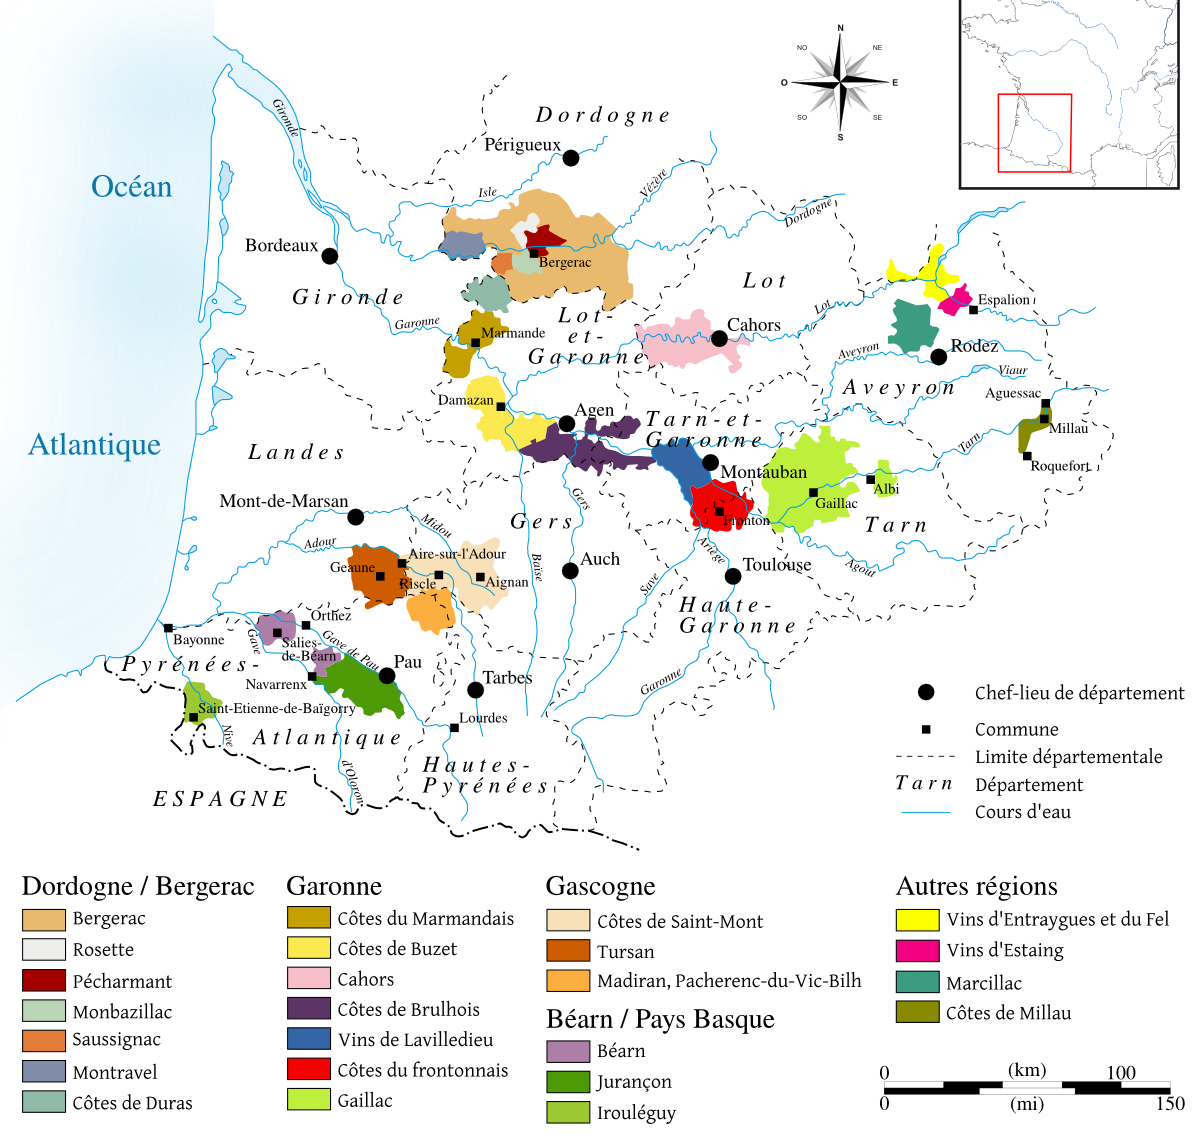 In olive-green the wine regions of Gaillac & Midi-Pyrénées https://en.wikipedia.org/wiki/South_West_France_(wine_region)